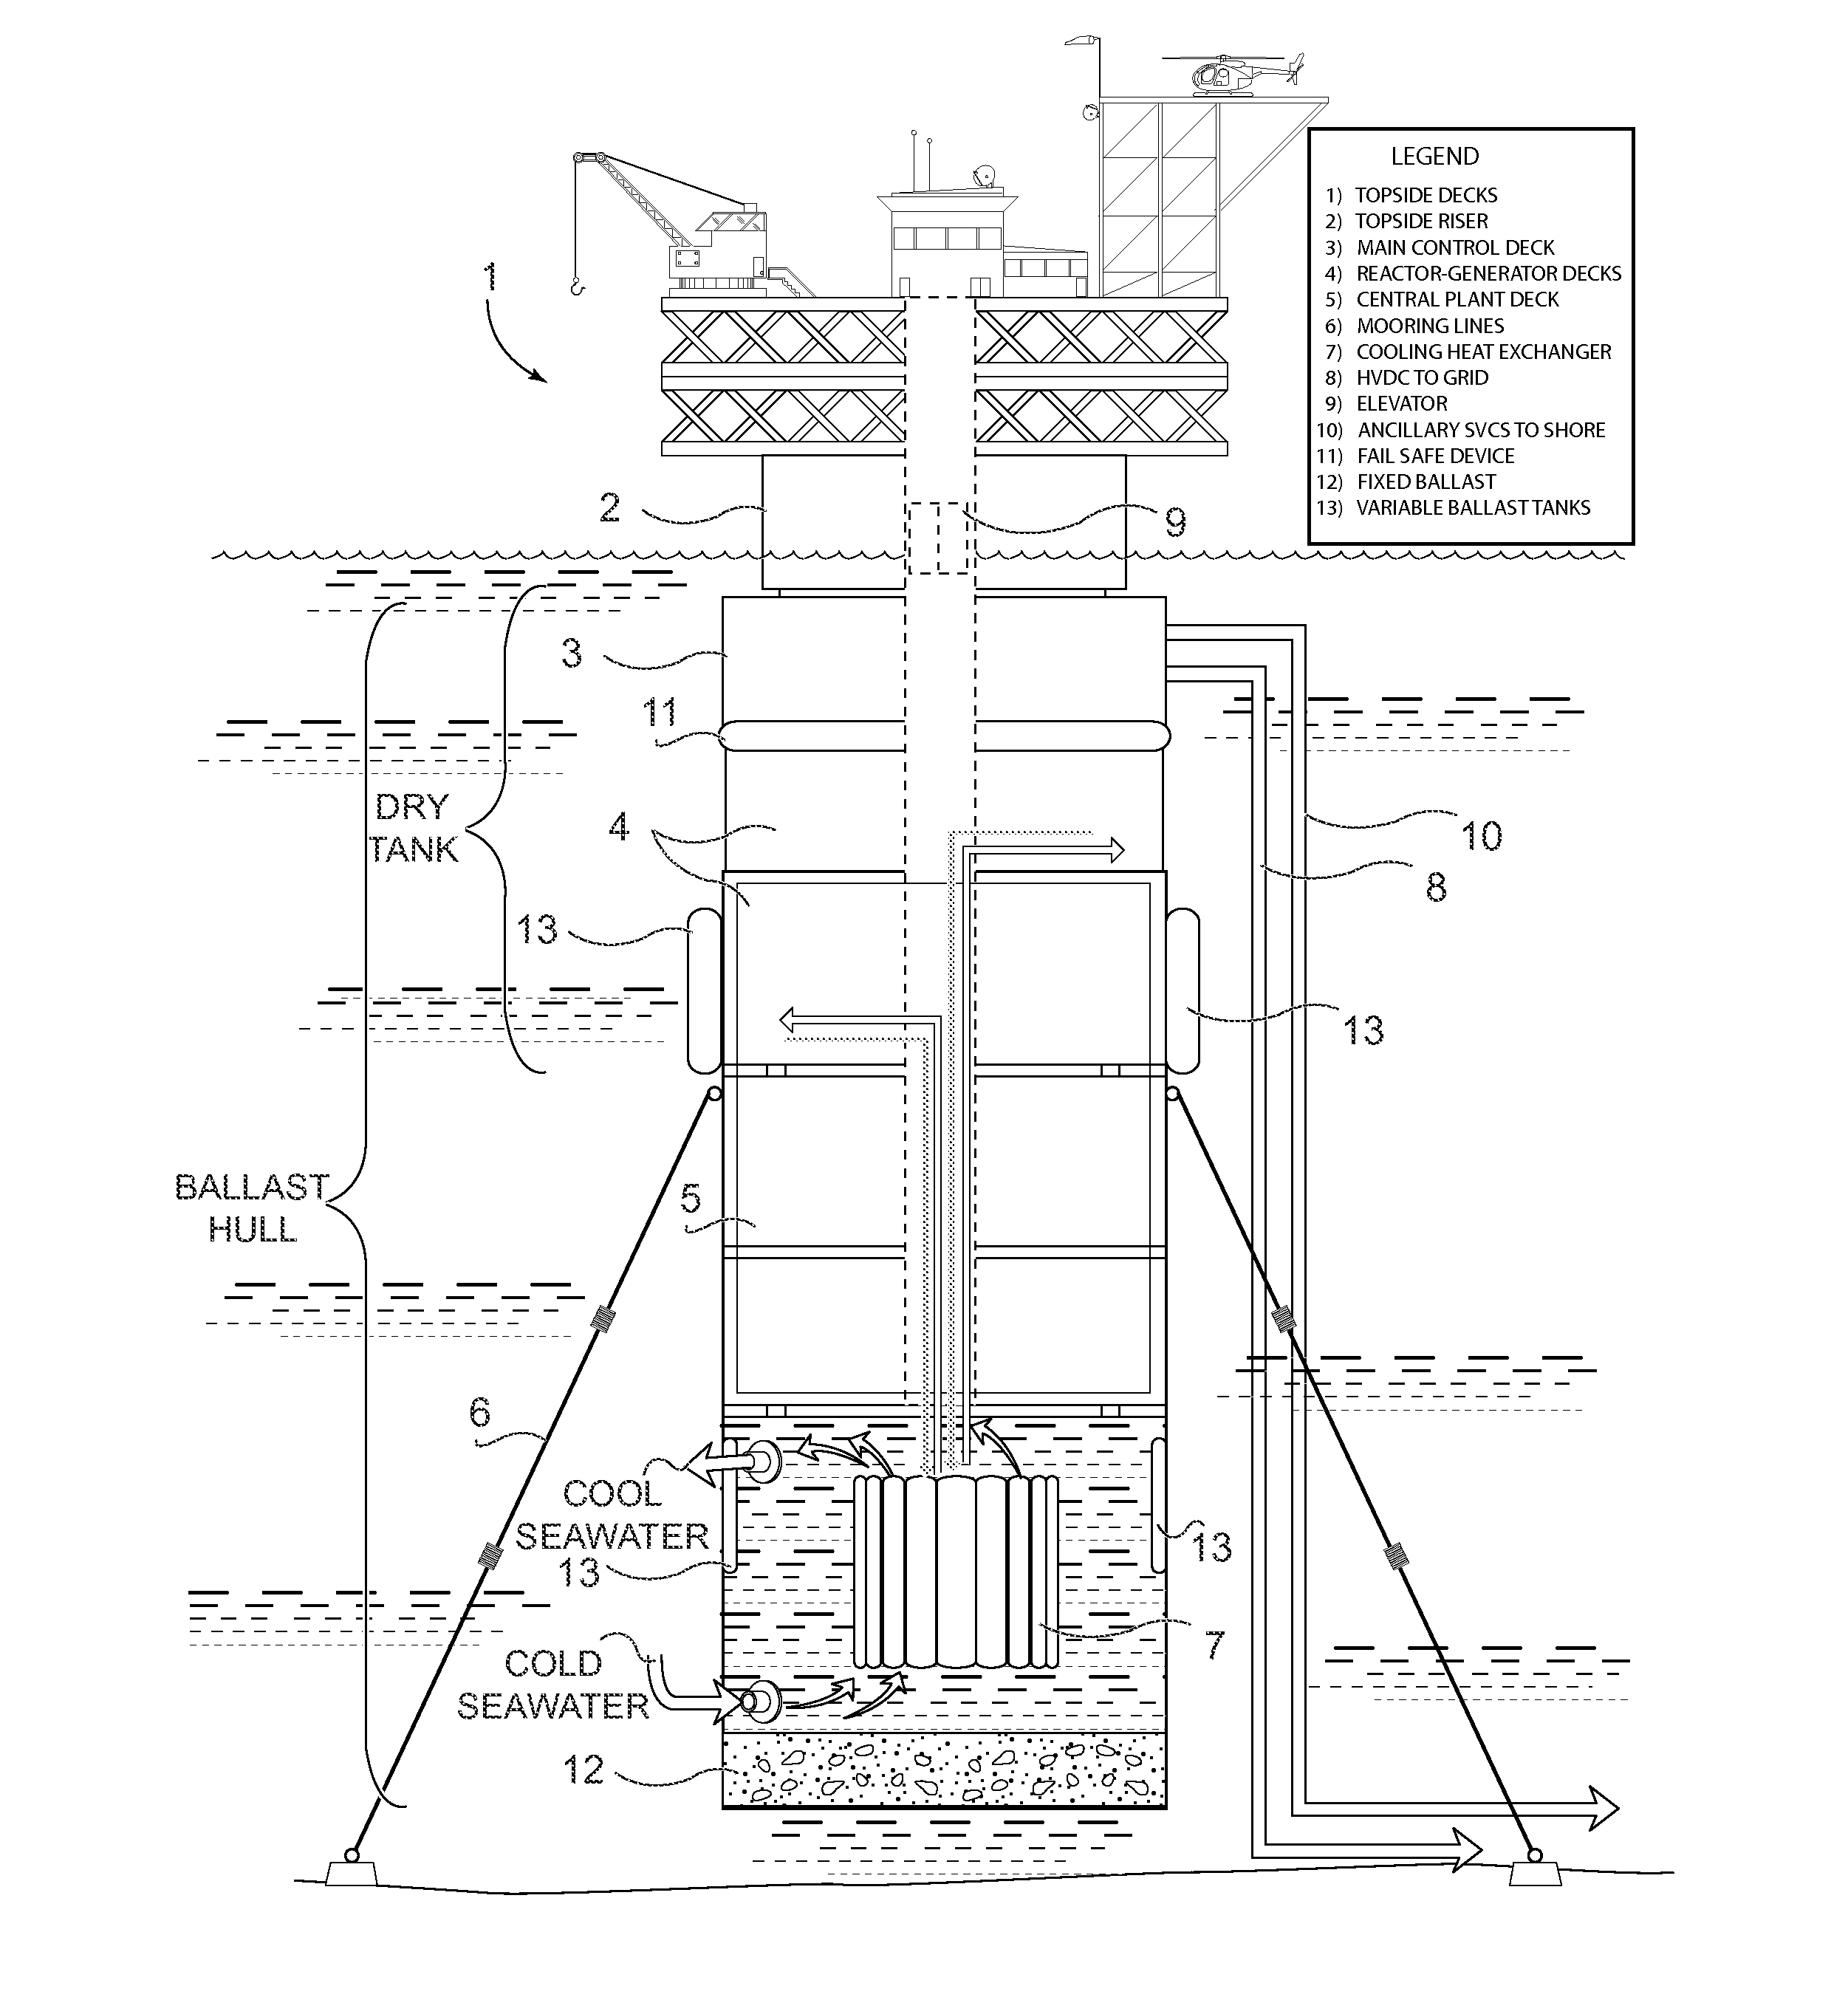 Semi Submersible Nuclear Power Plant and Multi-Purpose Platform